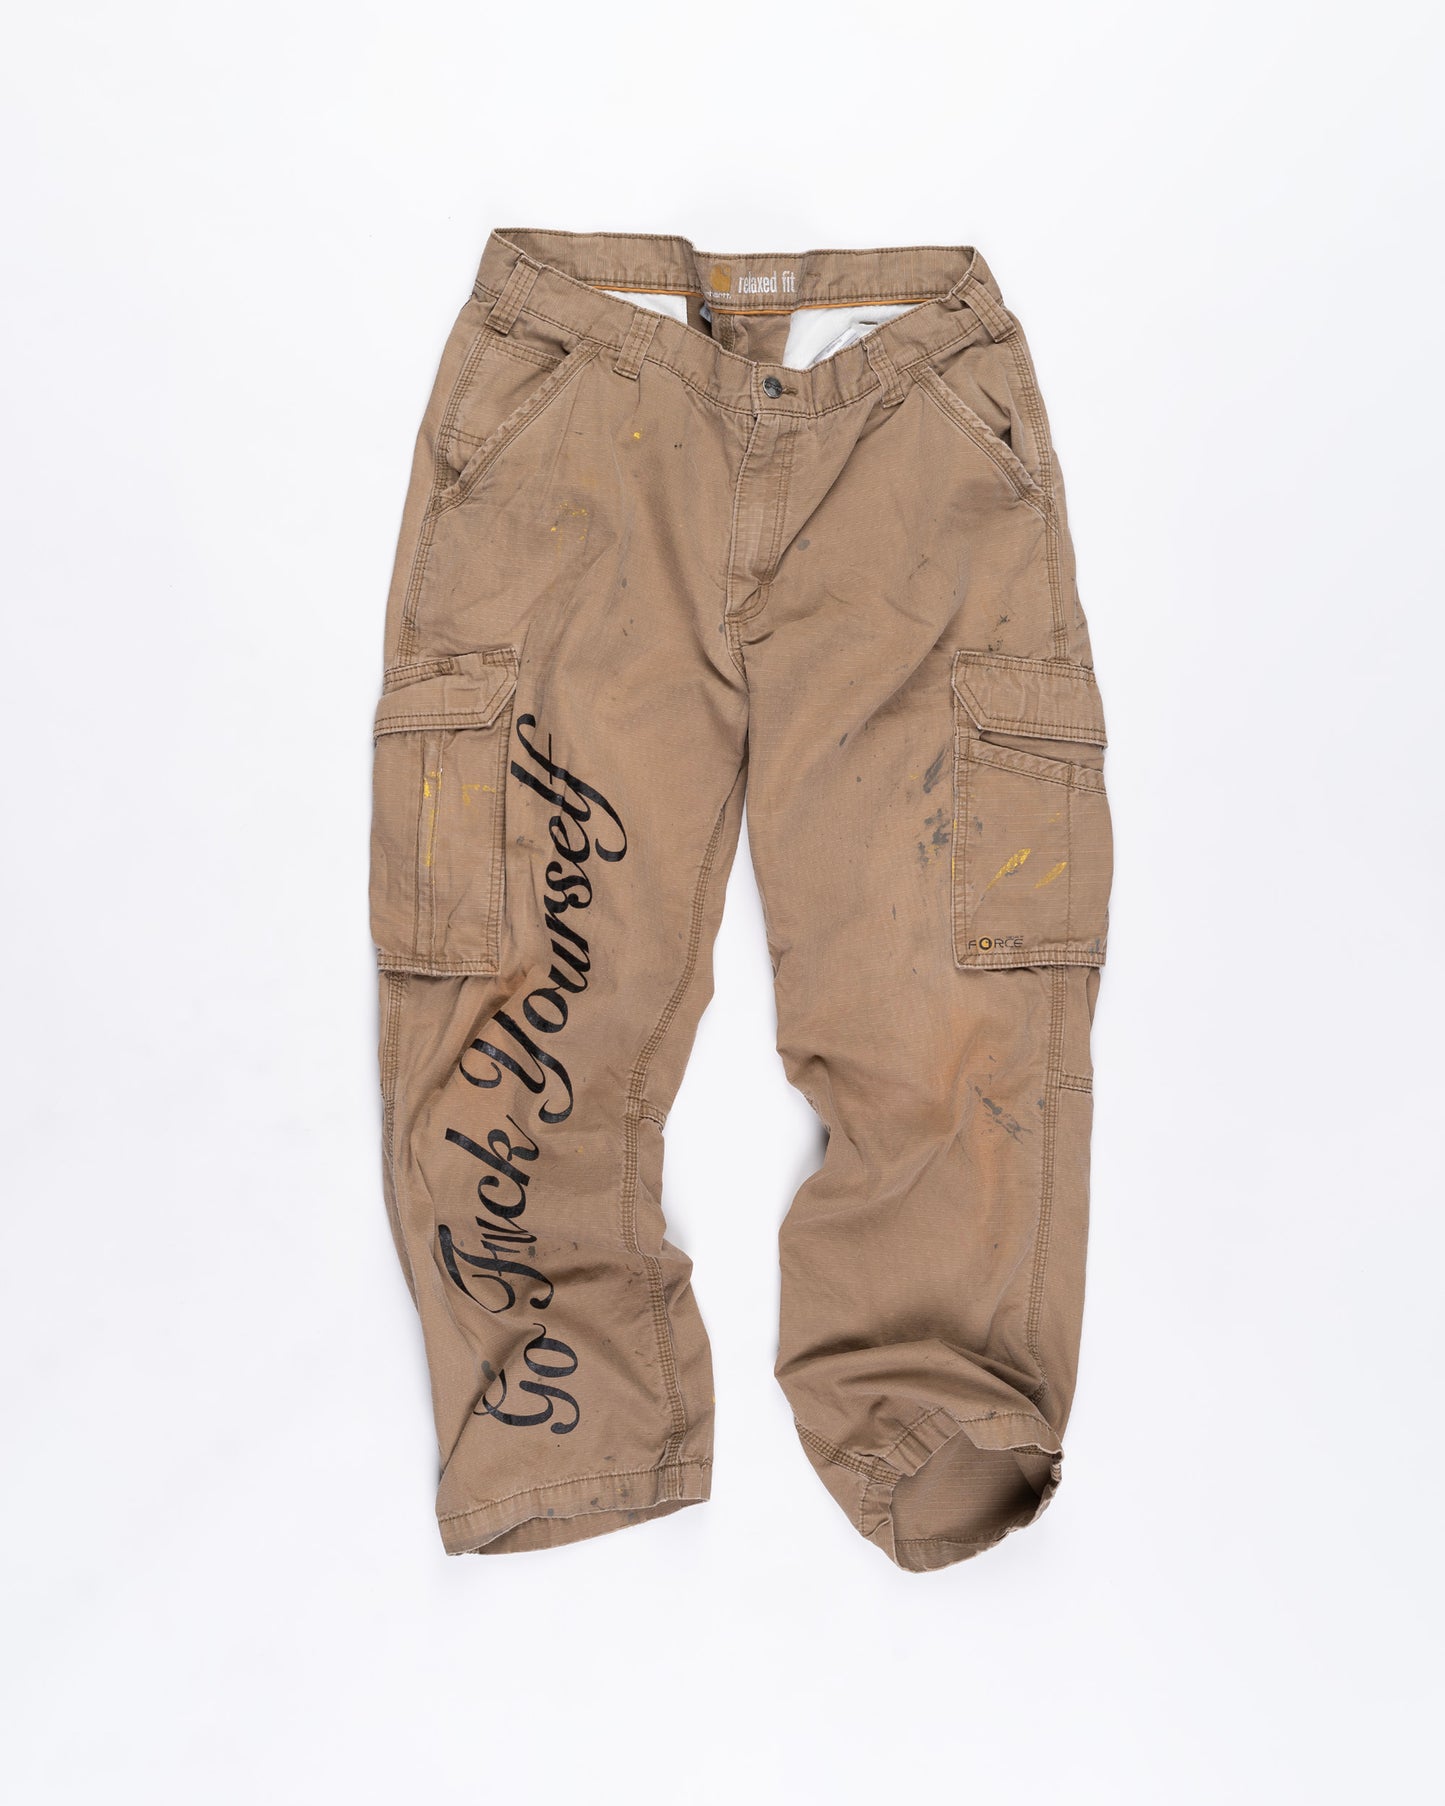 Tan Relaxed Fit Carhart Pants Size: 38